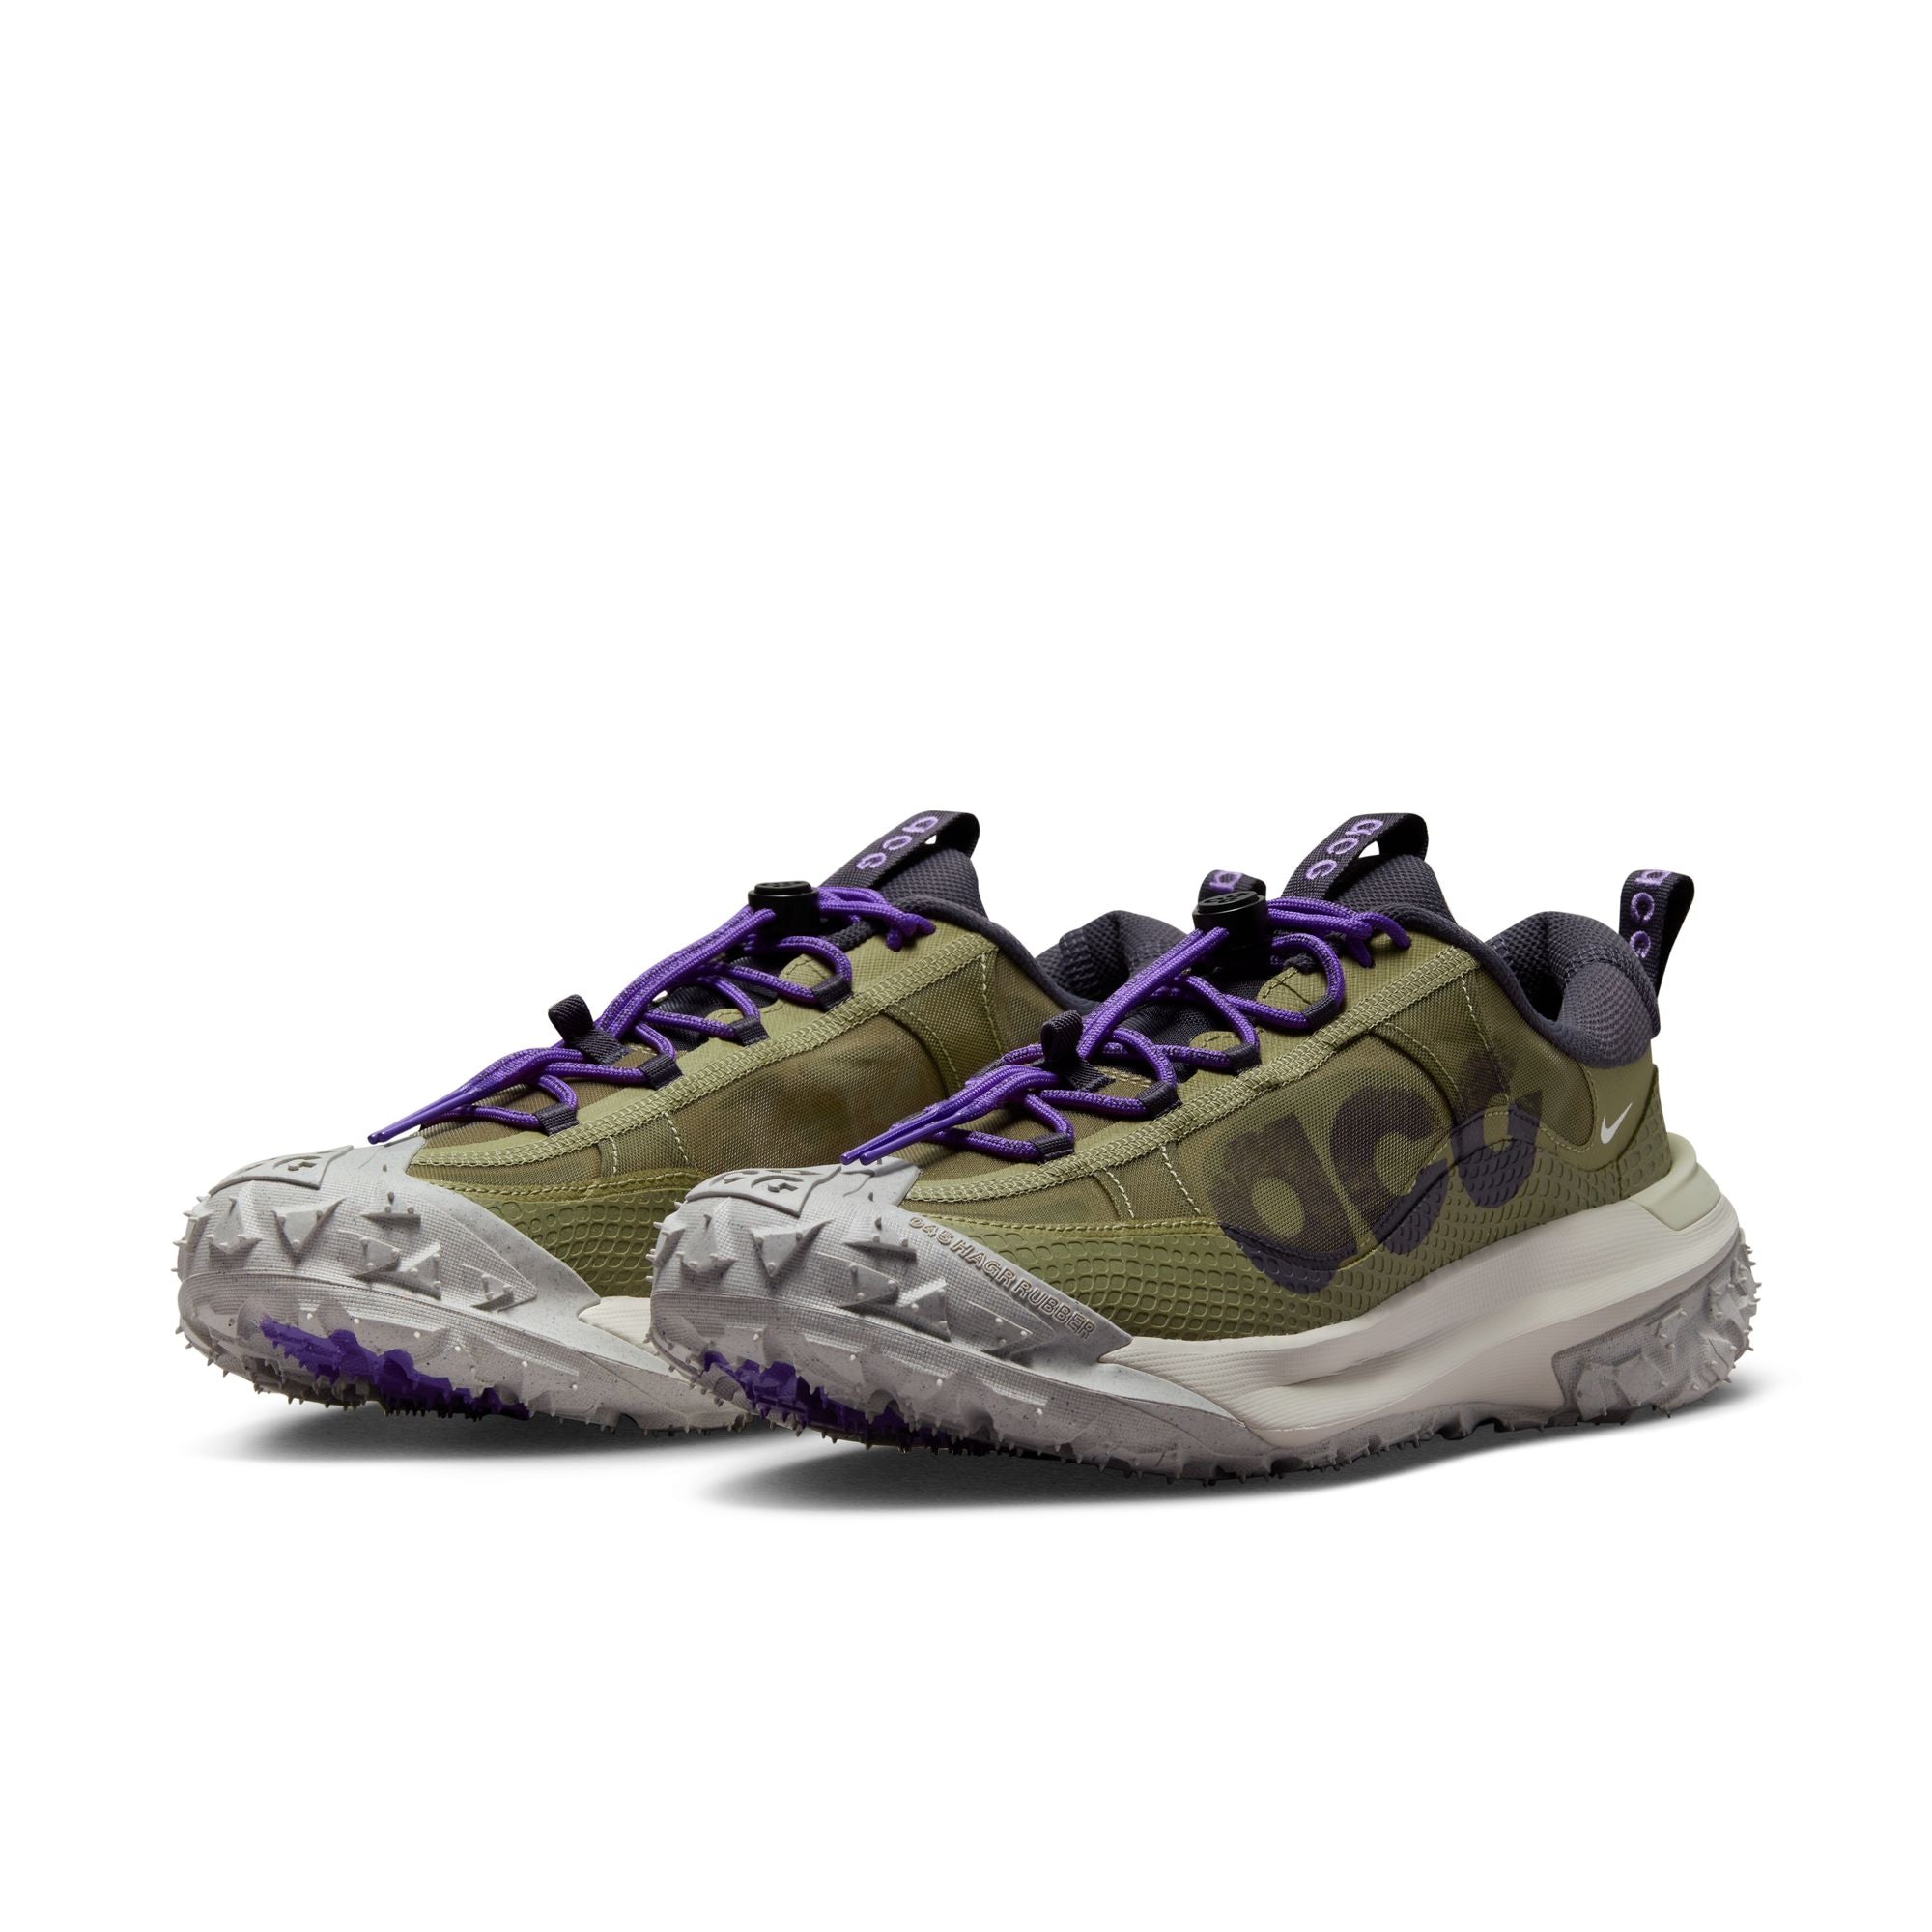 NIKE ACG MOUNTAIN FLY 2 LOW MENS SHOES